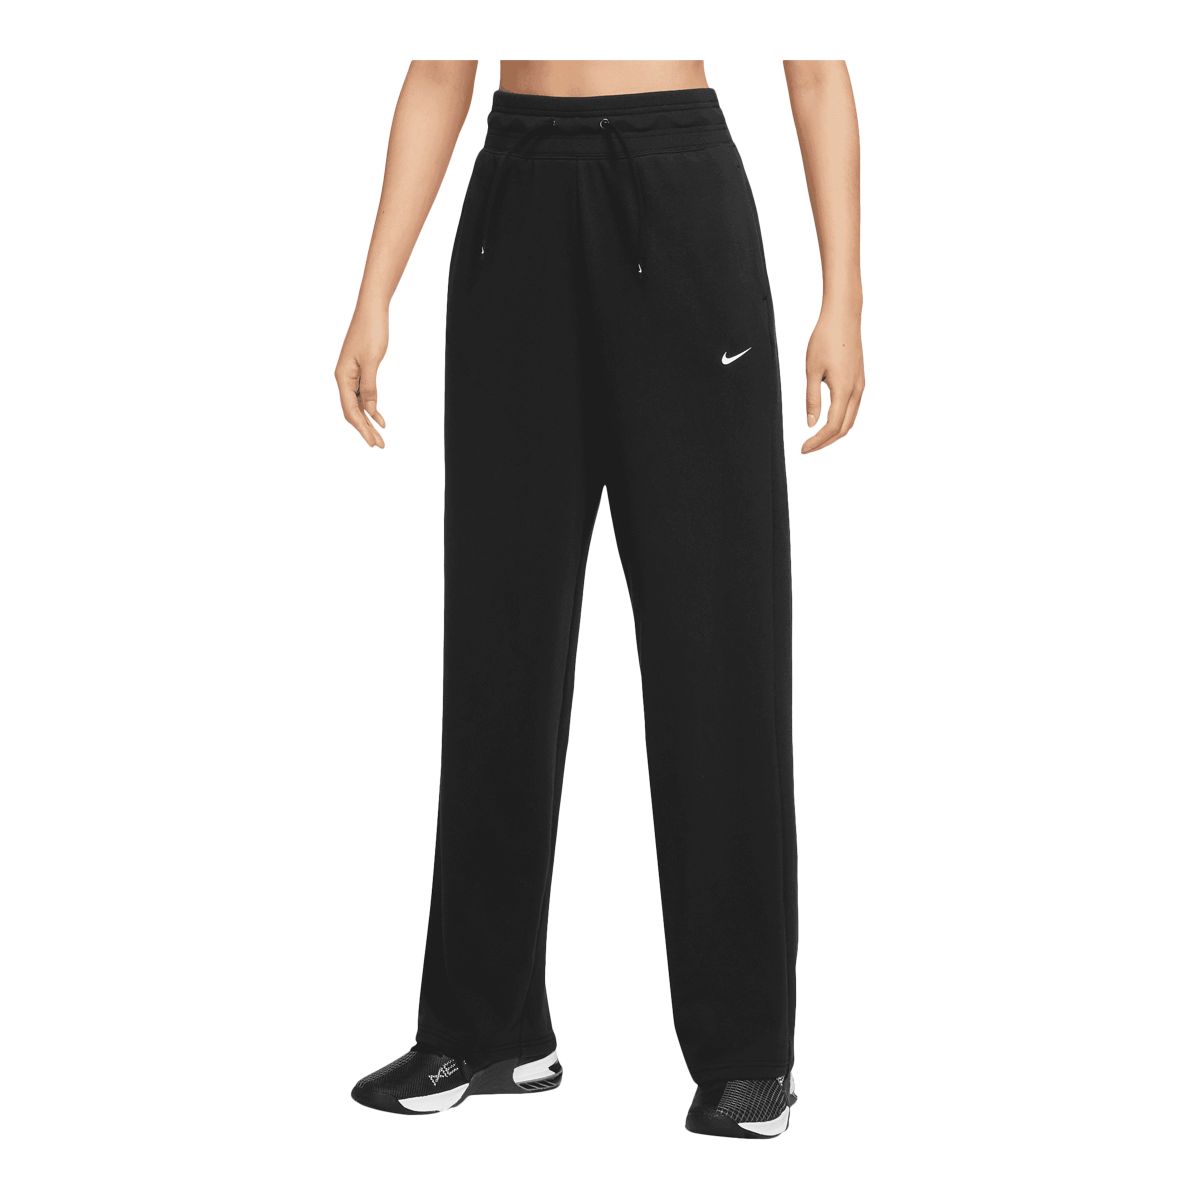 https://media-www.sportchek.ca/product/div-03-softgoods/dpt-70-athletic-clothing/sdpt-02-womens/334166899/nike-w-nk-one-df-oh-pant-f0127f52-6d87-41a8-8dd1-1207240ded4f-jpgrendition.jpg